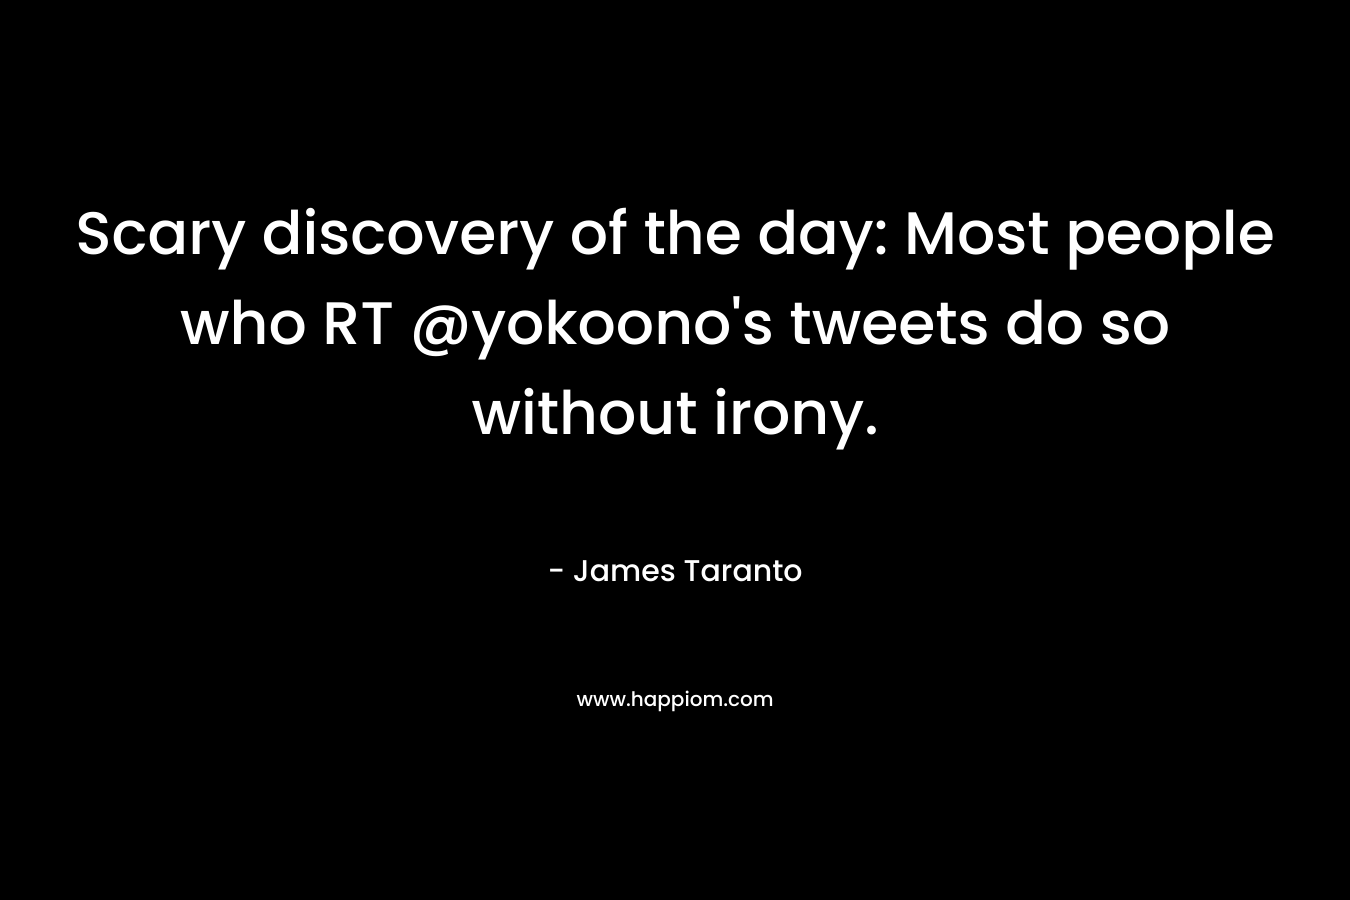 Scary discovery of the day: Most people who RT @yokoono’s tweets do so without irony. – James Taranto